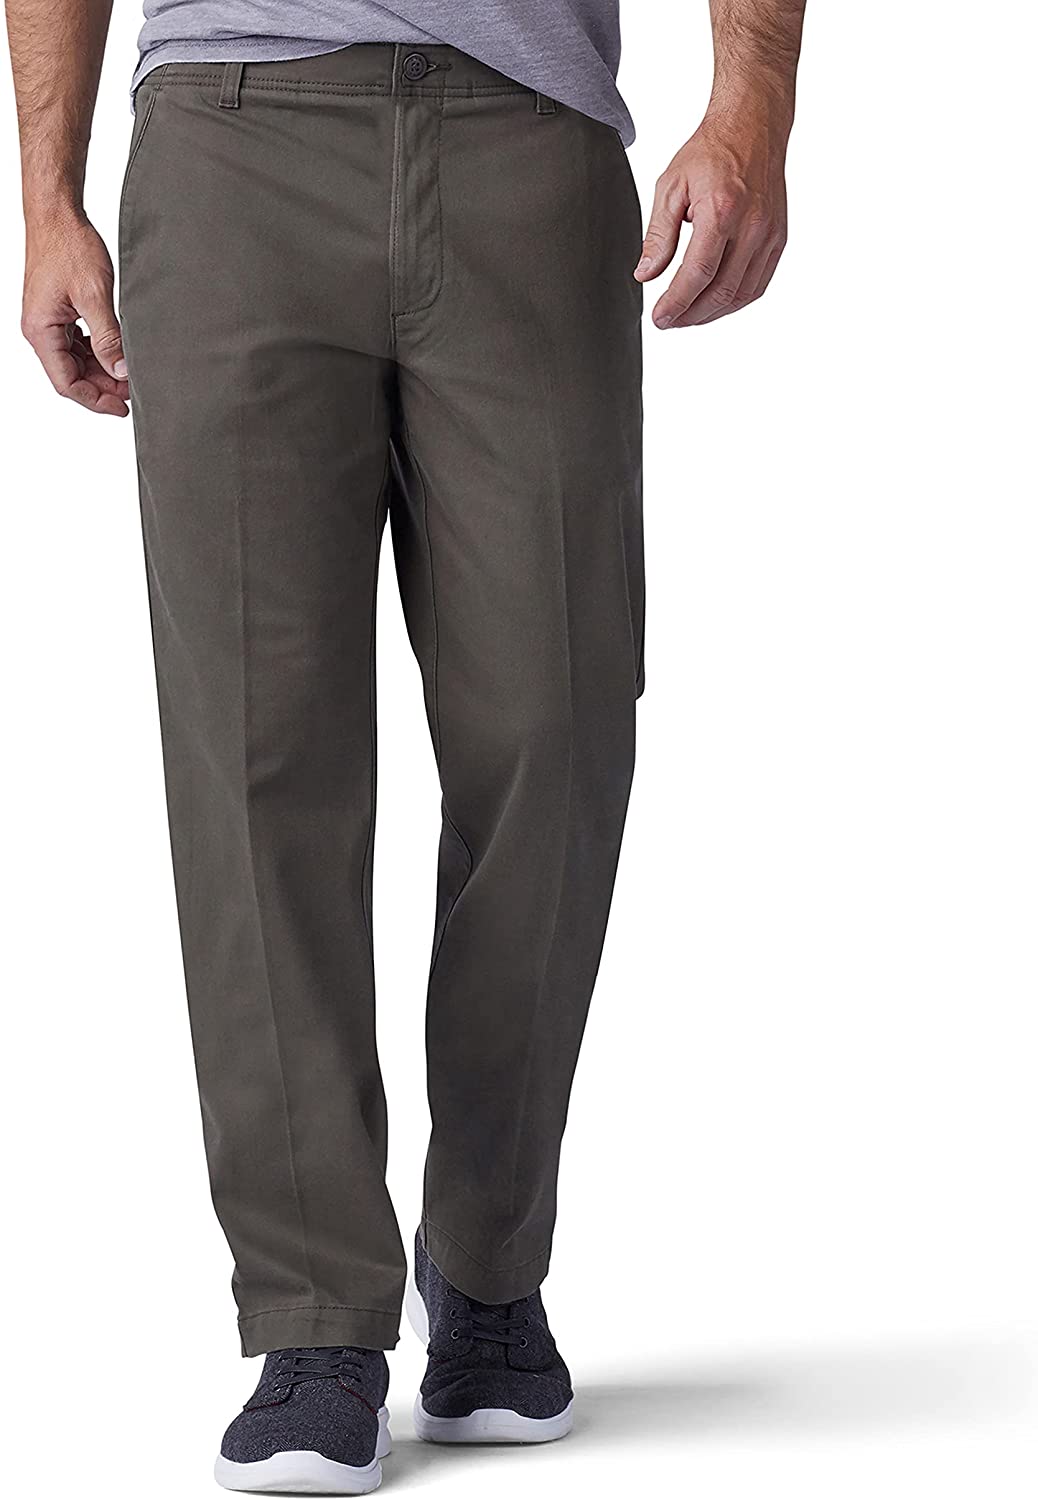 Lee Men's Performance Series Extreme Comfort Straight Fit Pant 